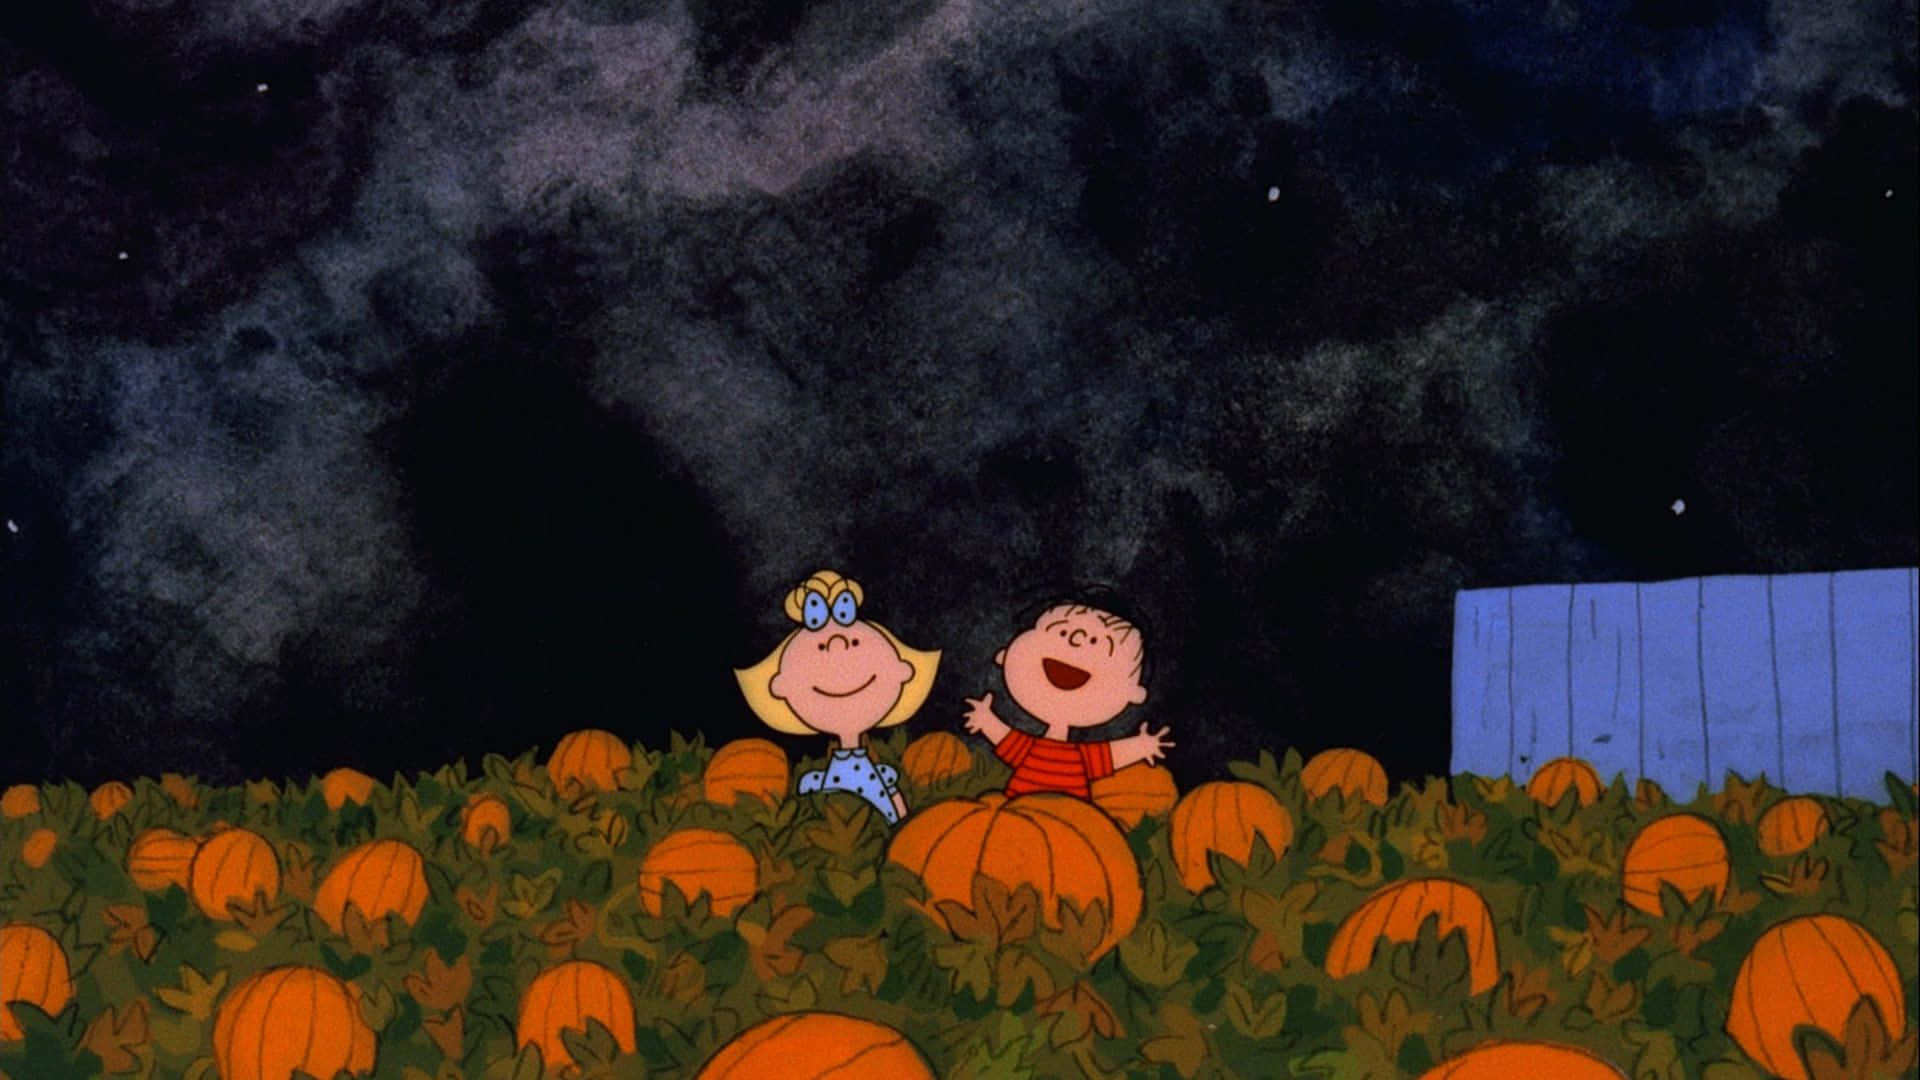 Linus&Sally In Pumpkin Patch Background